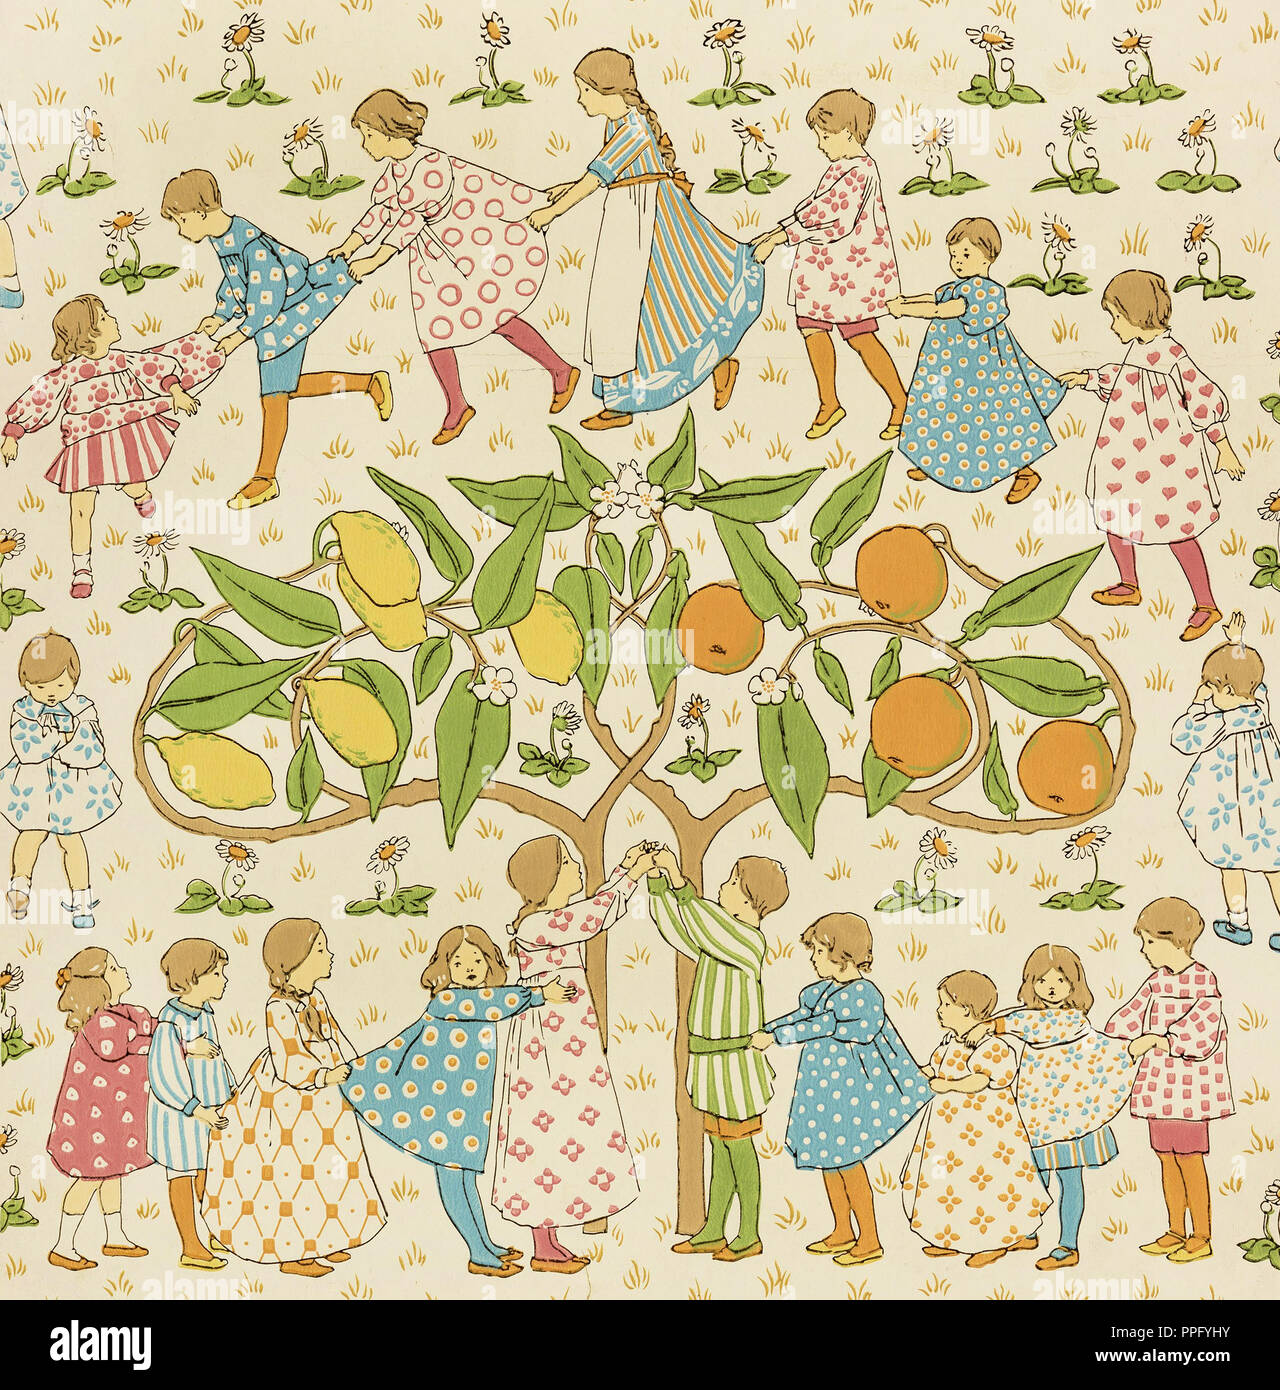 Jeffrey & Company, Oranges and Lemons Say the Bells of St. Clements 1902 Machine-printed on paper. Cooper Hewitt, Smithsonian Design Museum, New York  Stock Photo